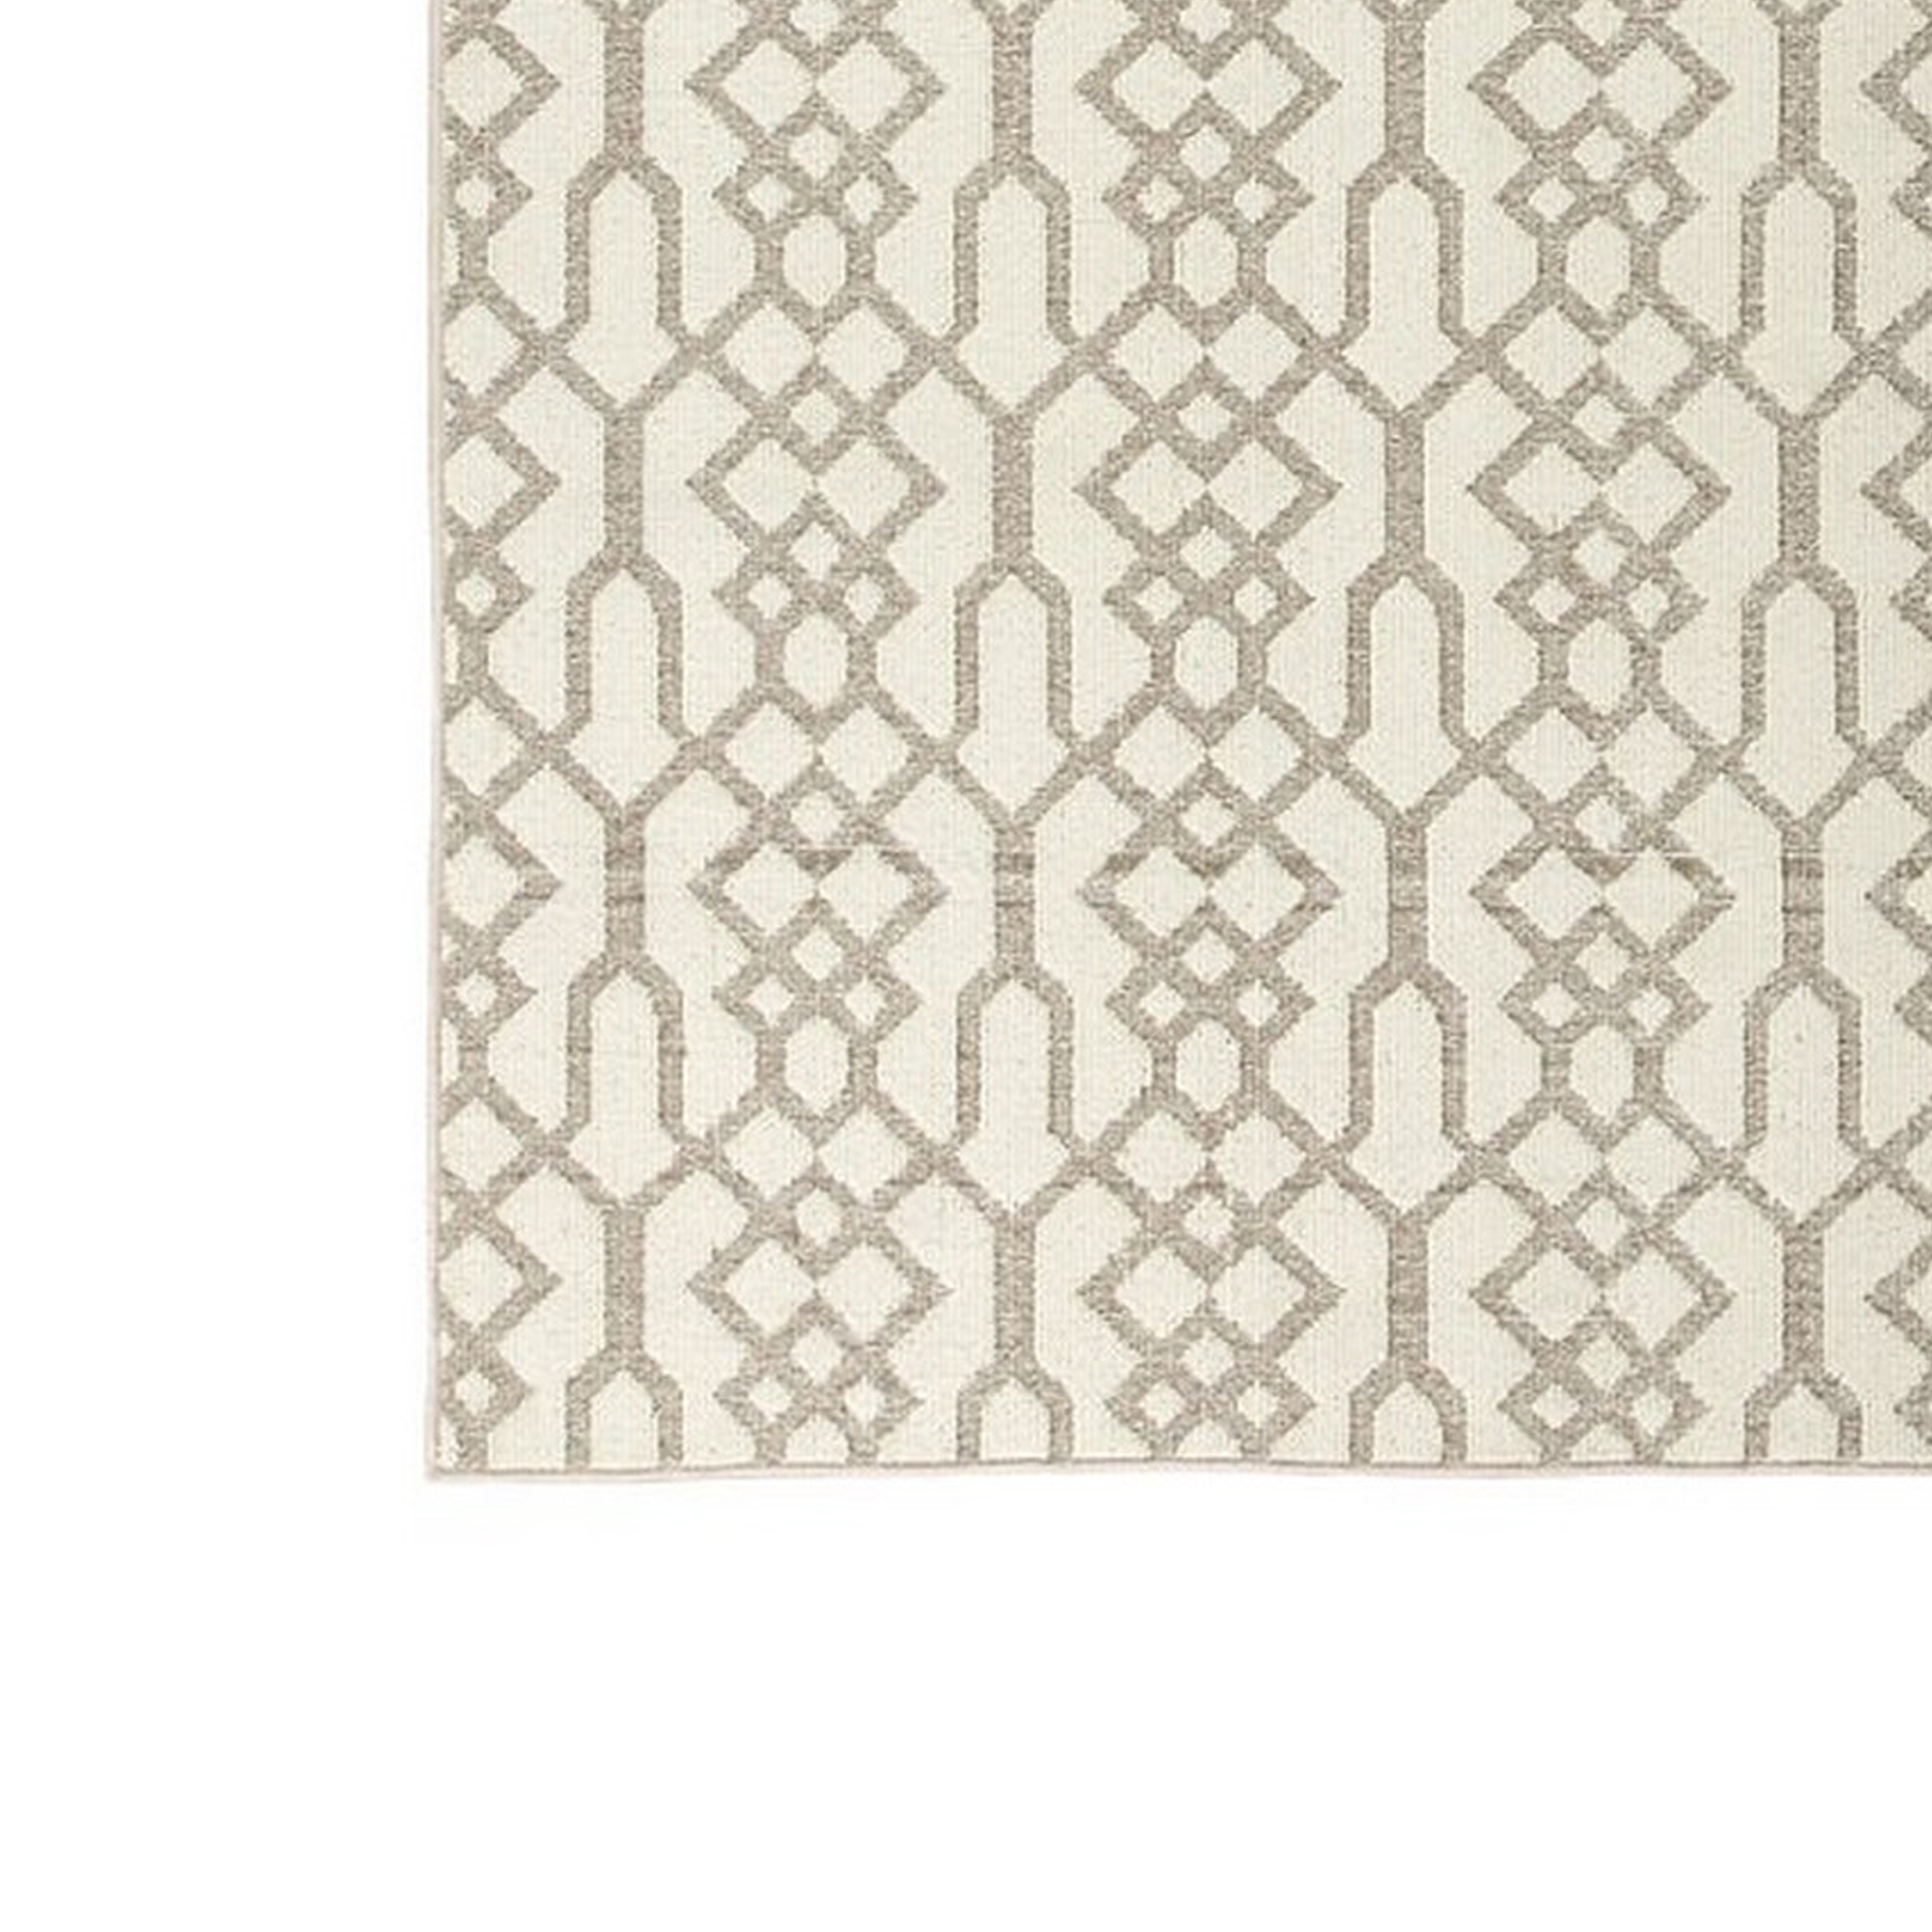 Machine Tufted Fabric Rug With Open Trellis Pattern, Large, Cream And Brown- Saltoro Sherpi